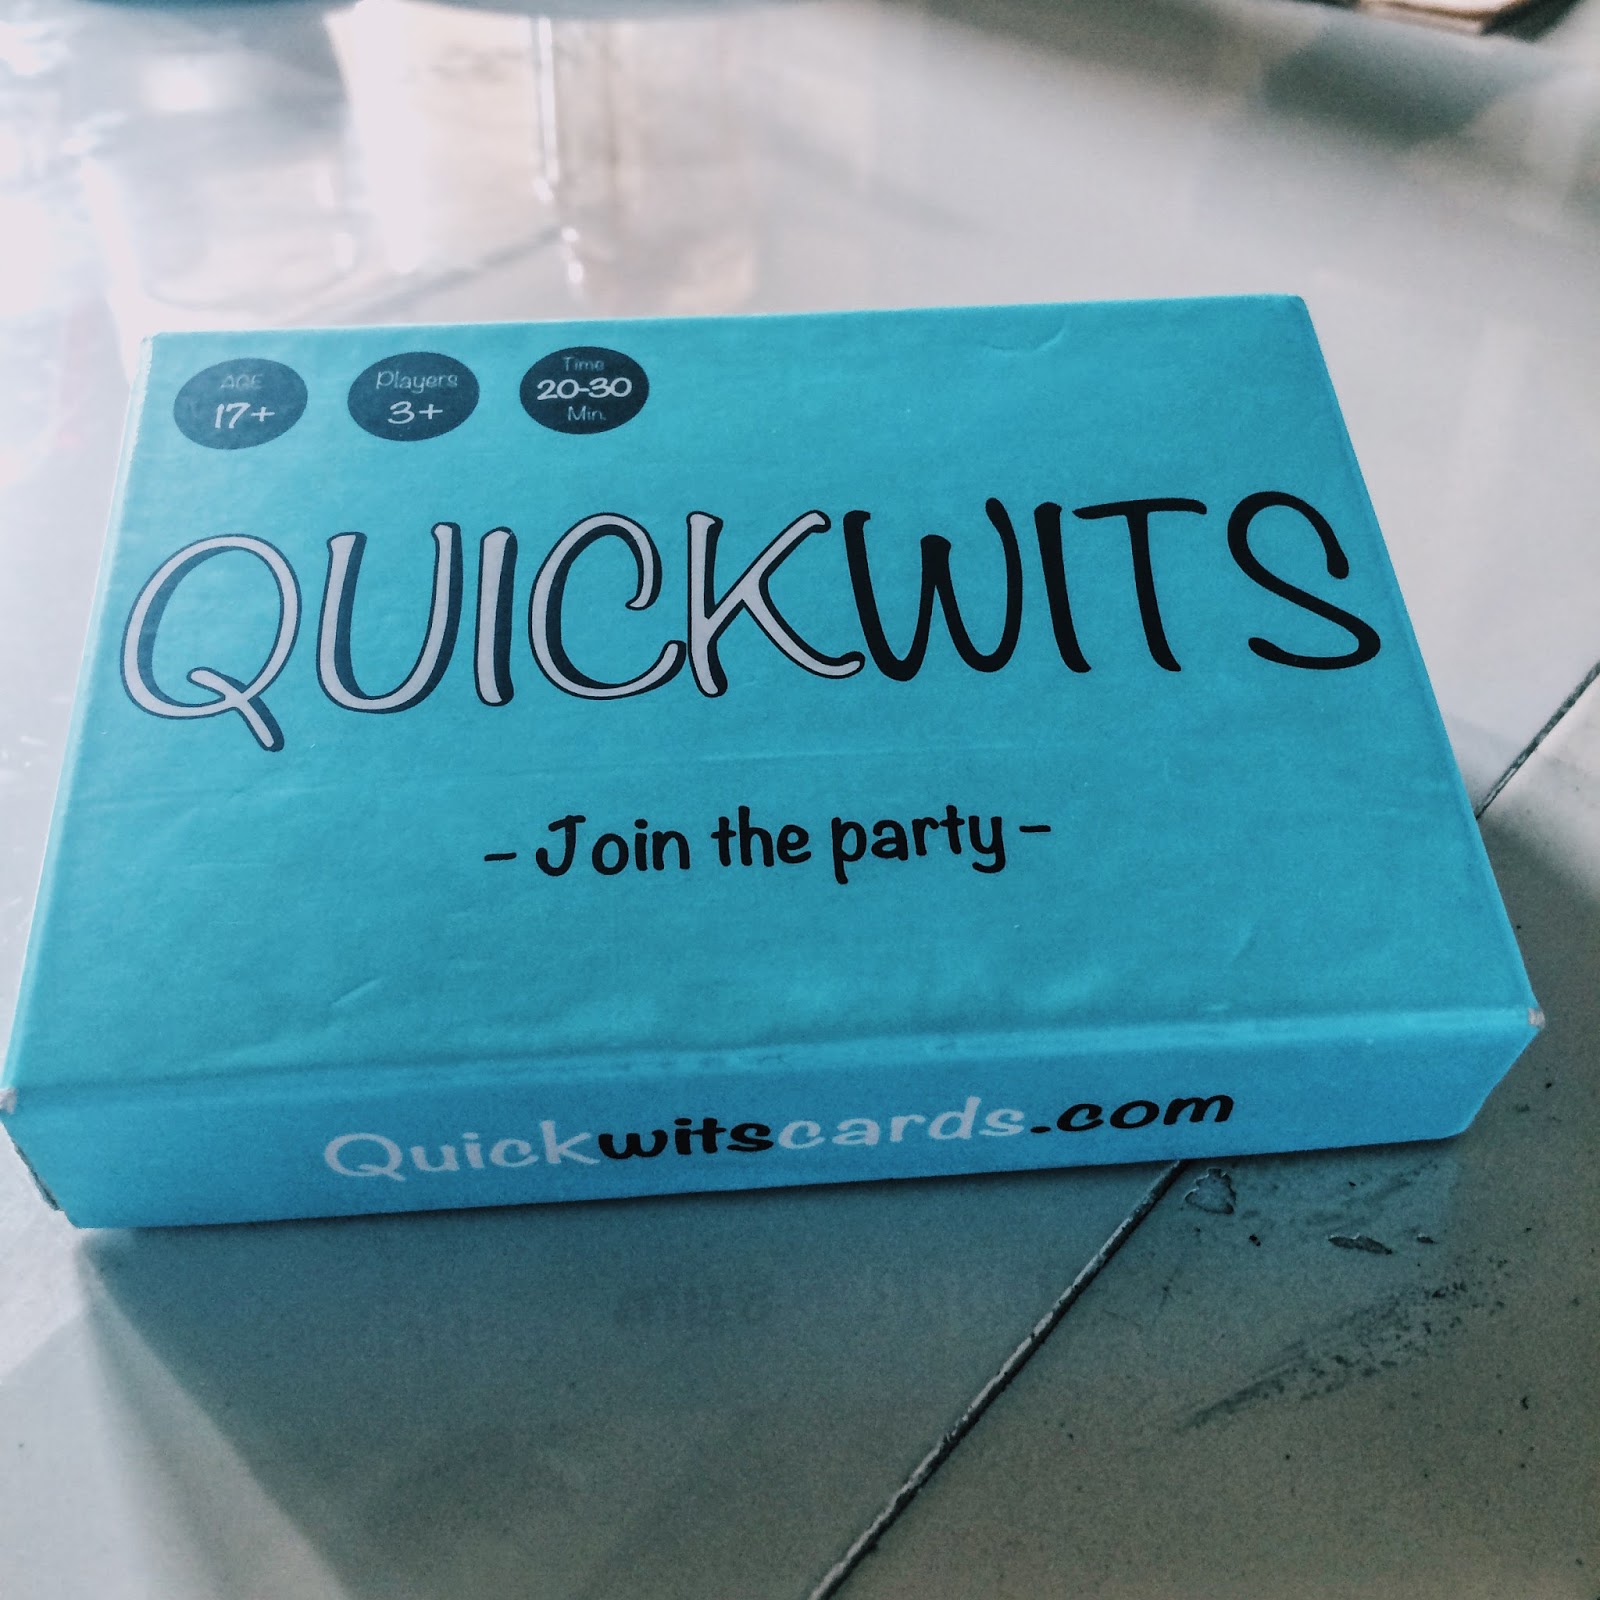 http www.quickwitscards.com instructions